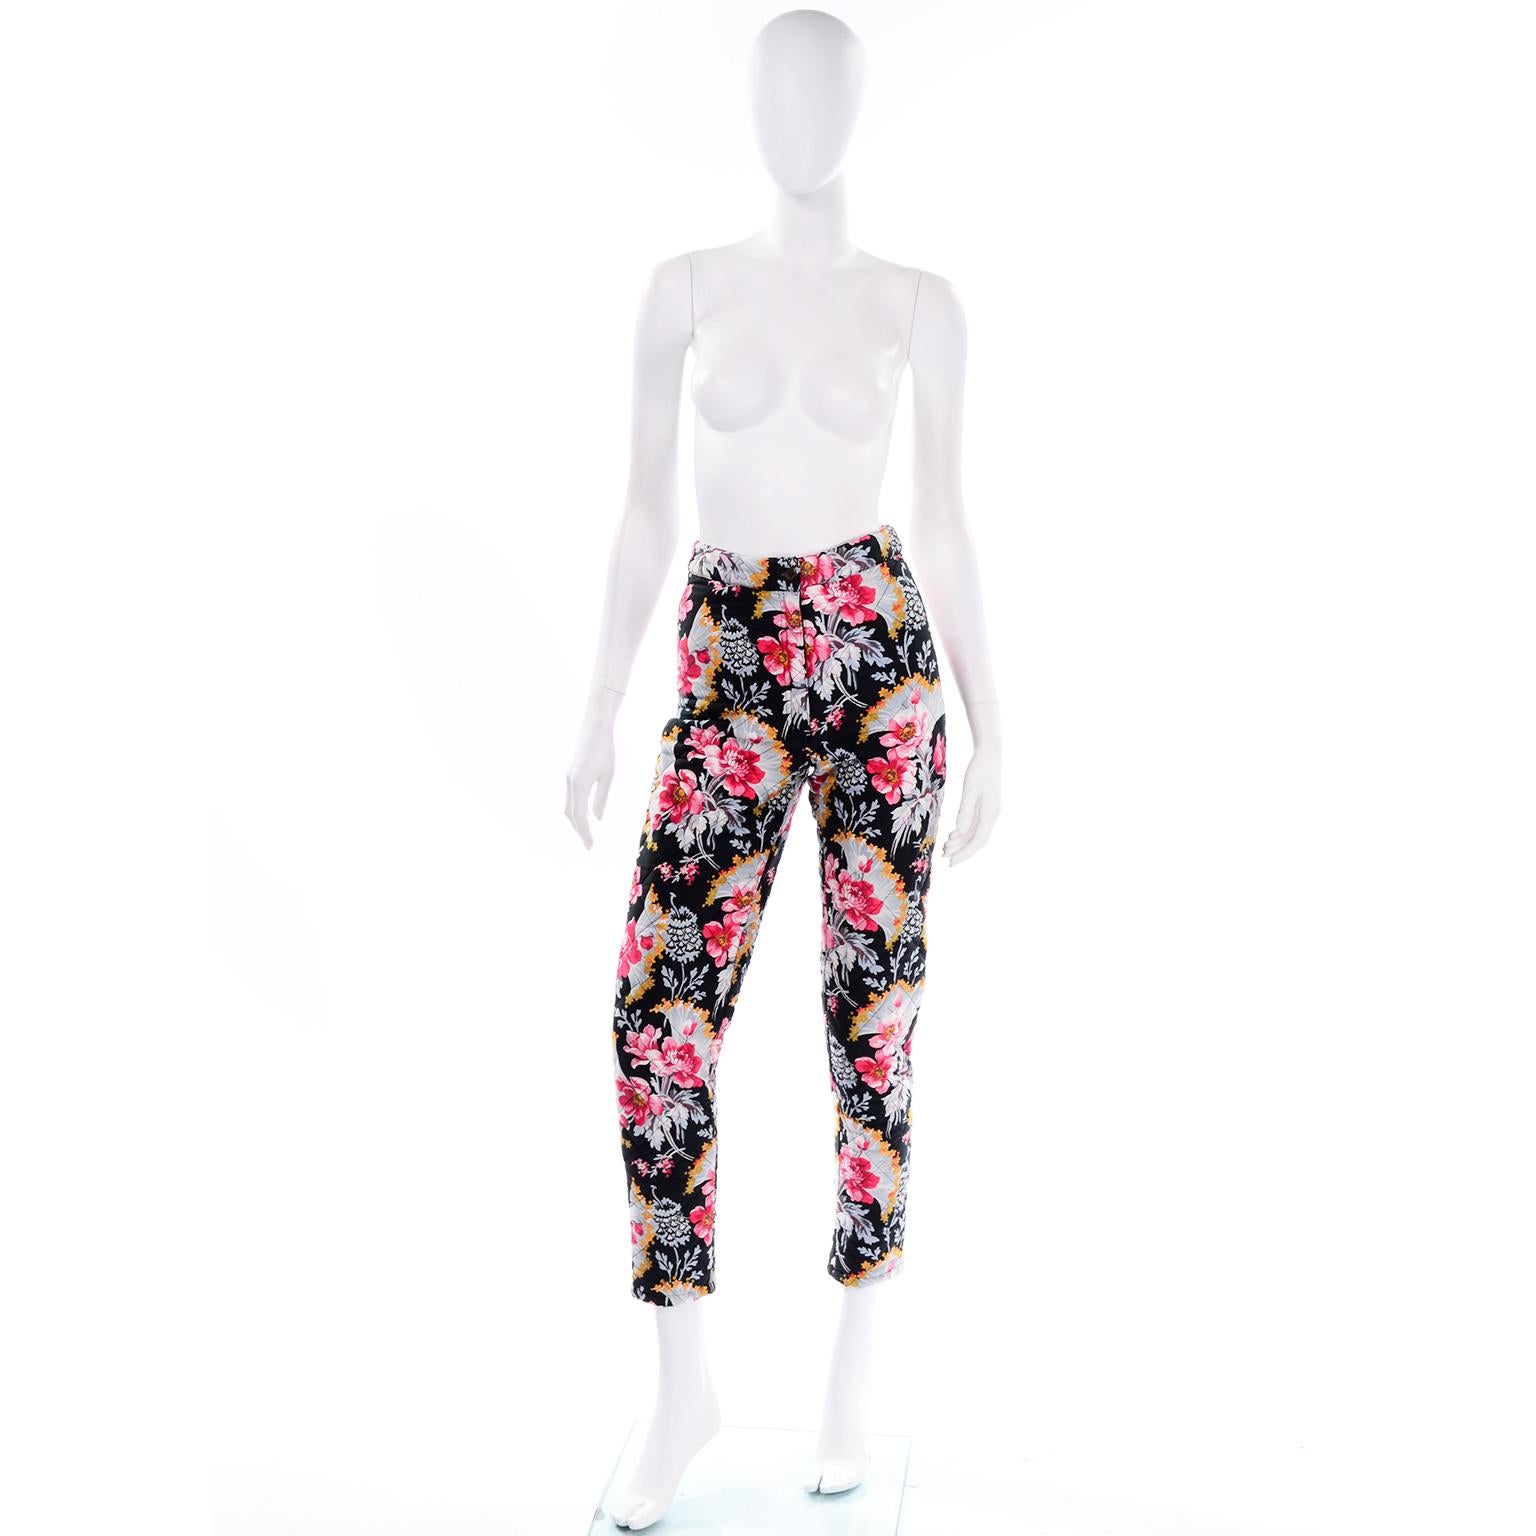 These colorful vintage Kenzo quilted floral pants are so special and unique! They are the pants you pull out when you want to make a statement. Not only are they very cool, they are super flattering. These vintage pants have a metal button closure